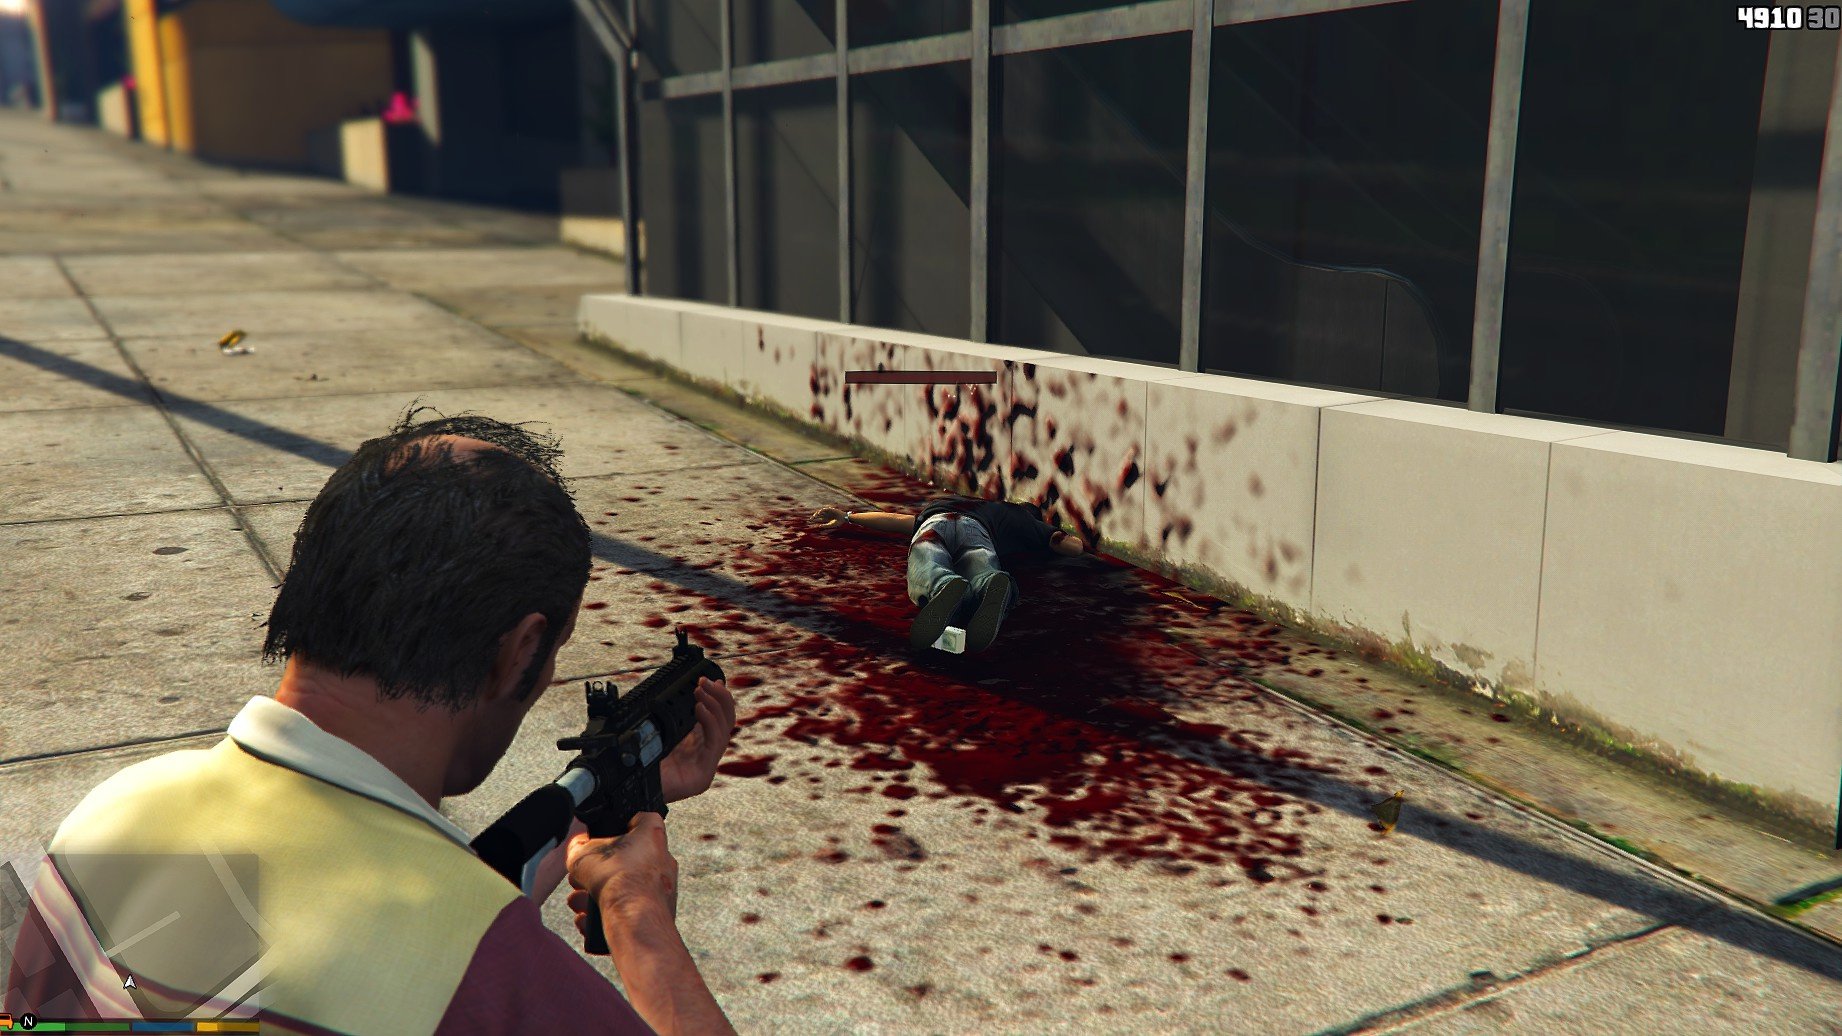 Blood and gore for gta 5 фото 6